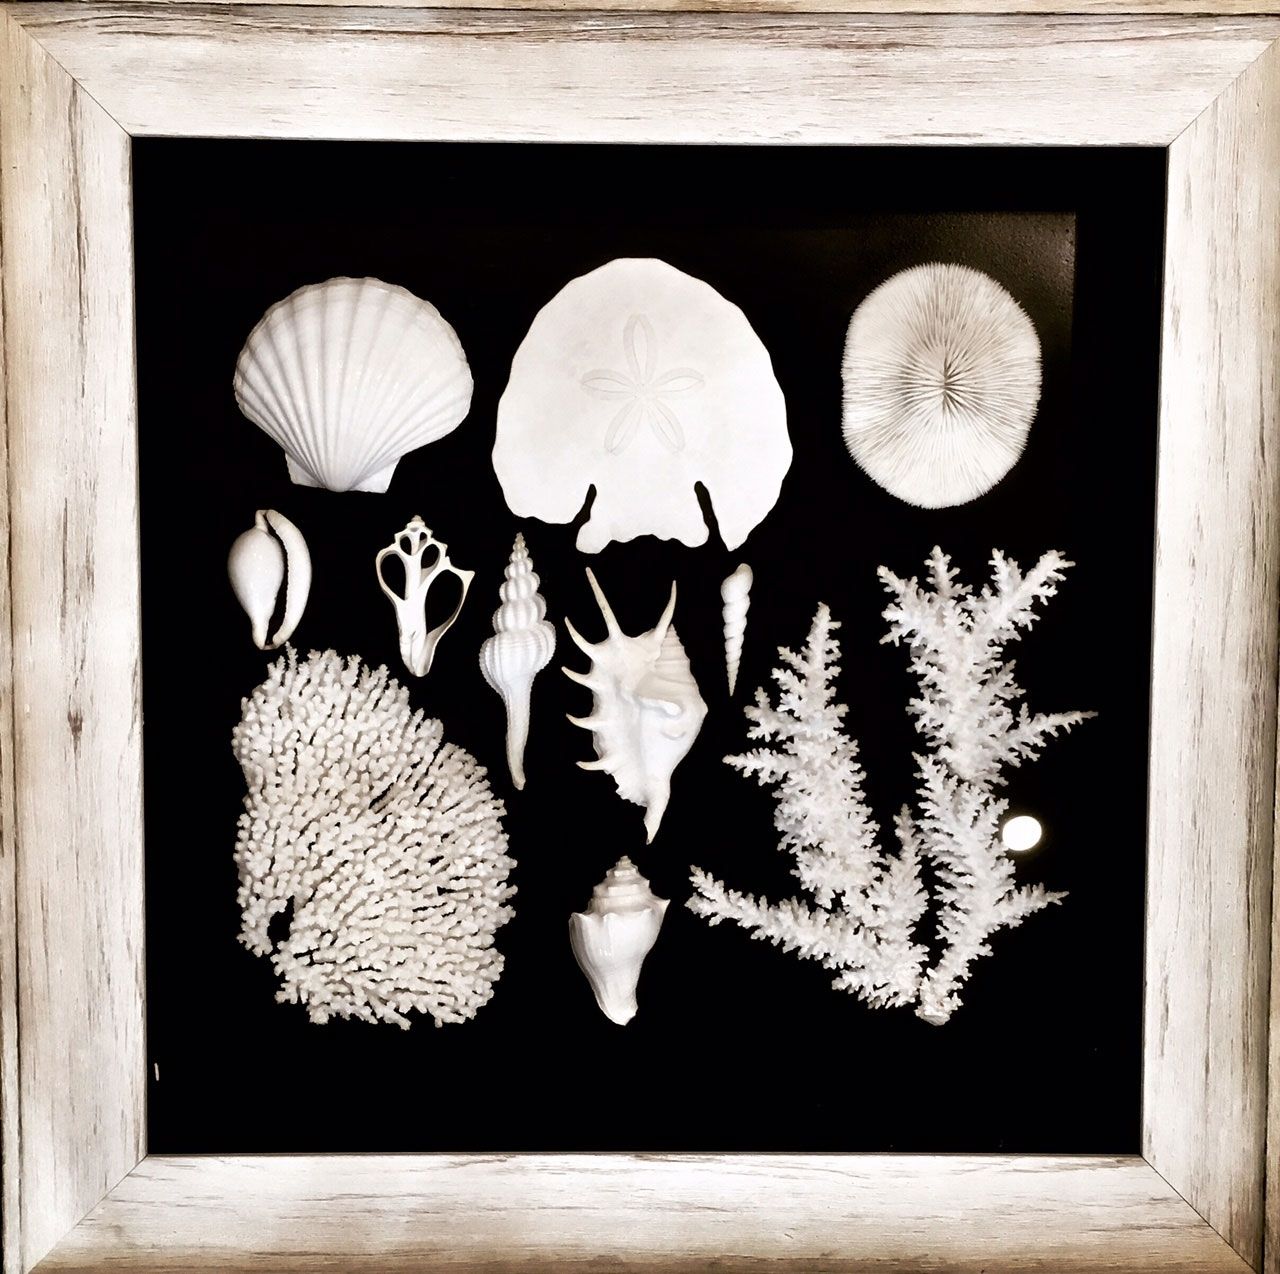 Coral And Shell Framed Wall Art | Moss Furniture : Moss Furniture Throughout Framed Wall Art (View 20 of 20)